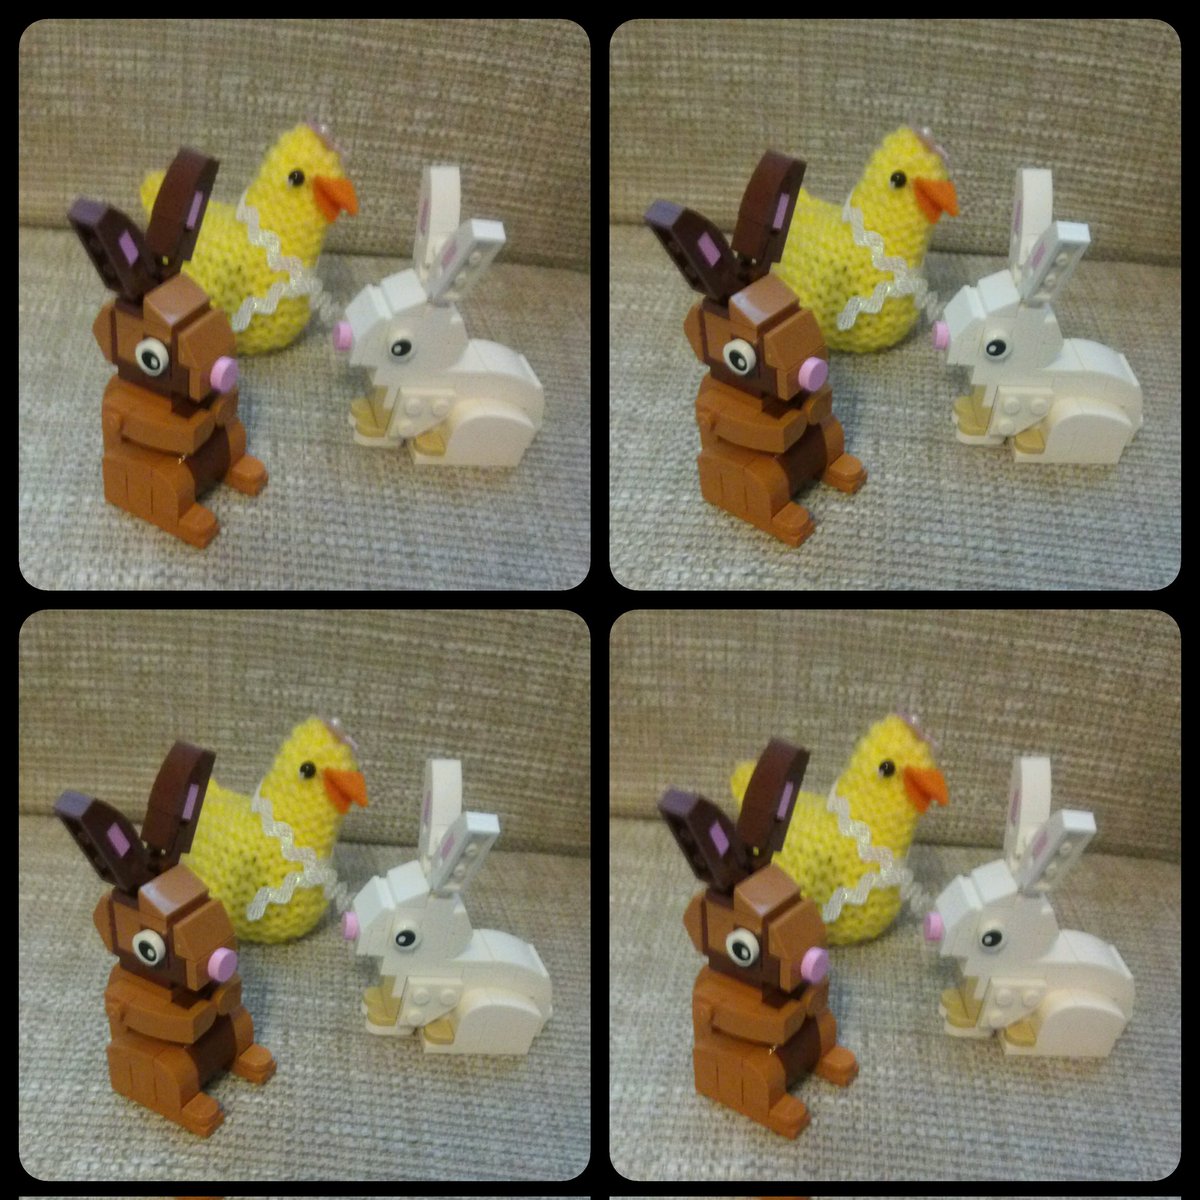 #HappyEaster  #LEGO Easter bunnies and knitted #CREAMEGG chick 3D image top parallel view similar to magic eye images bottom pair cross eyed view.